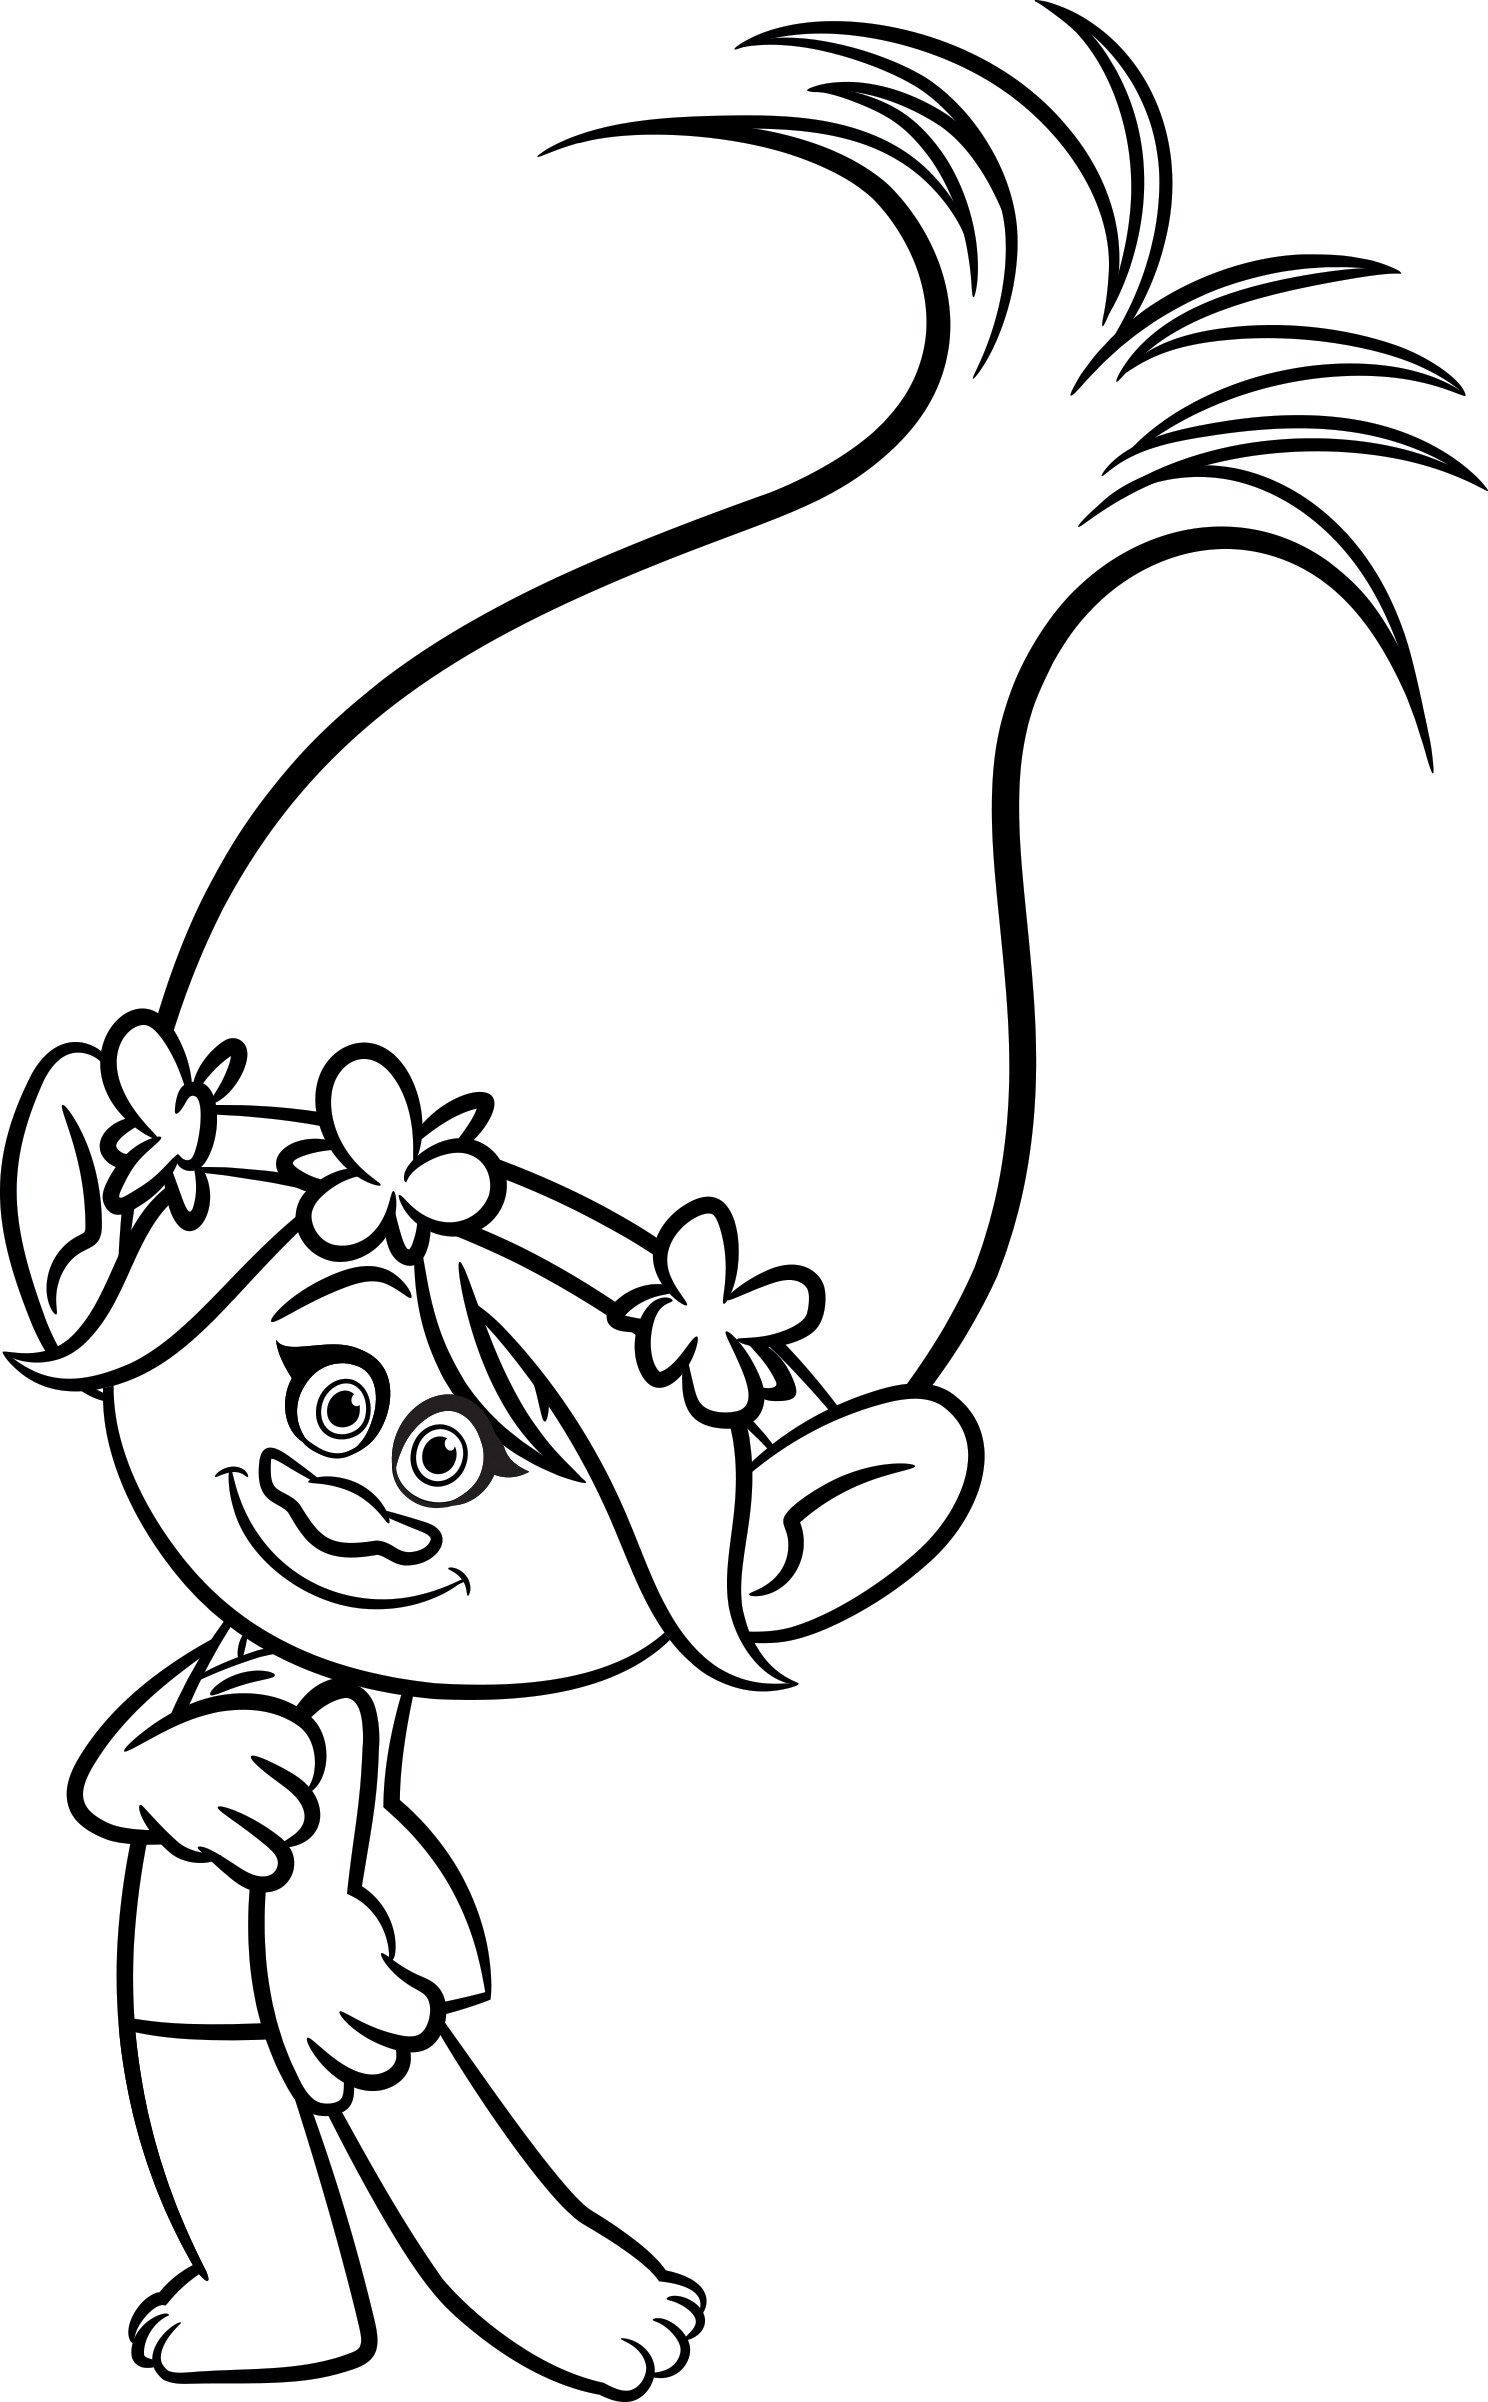 Poppy Troll Coloring Page Free Wallpaper